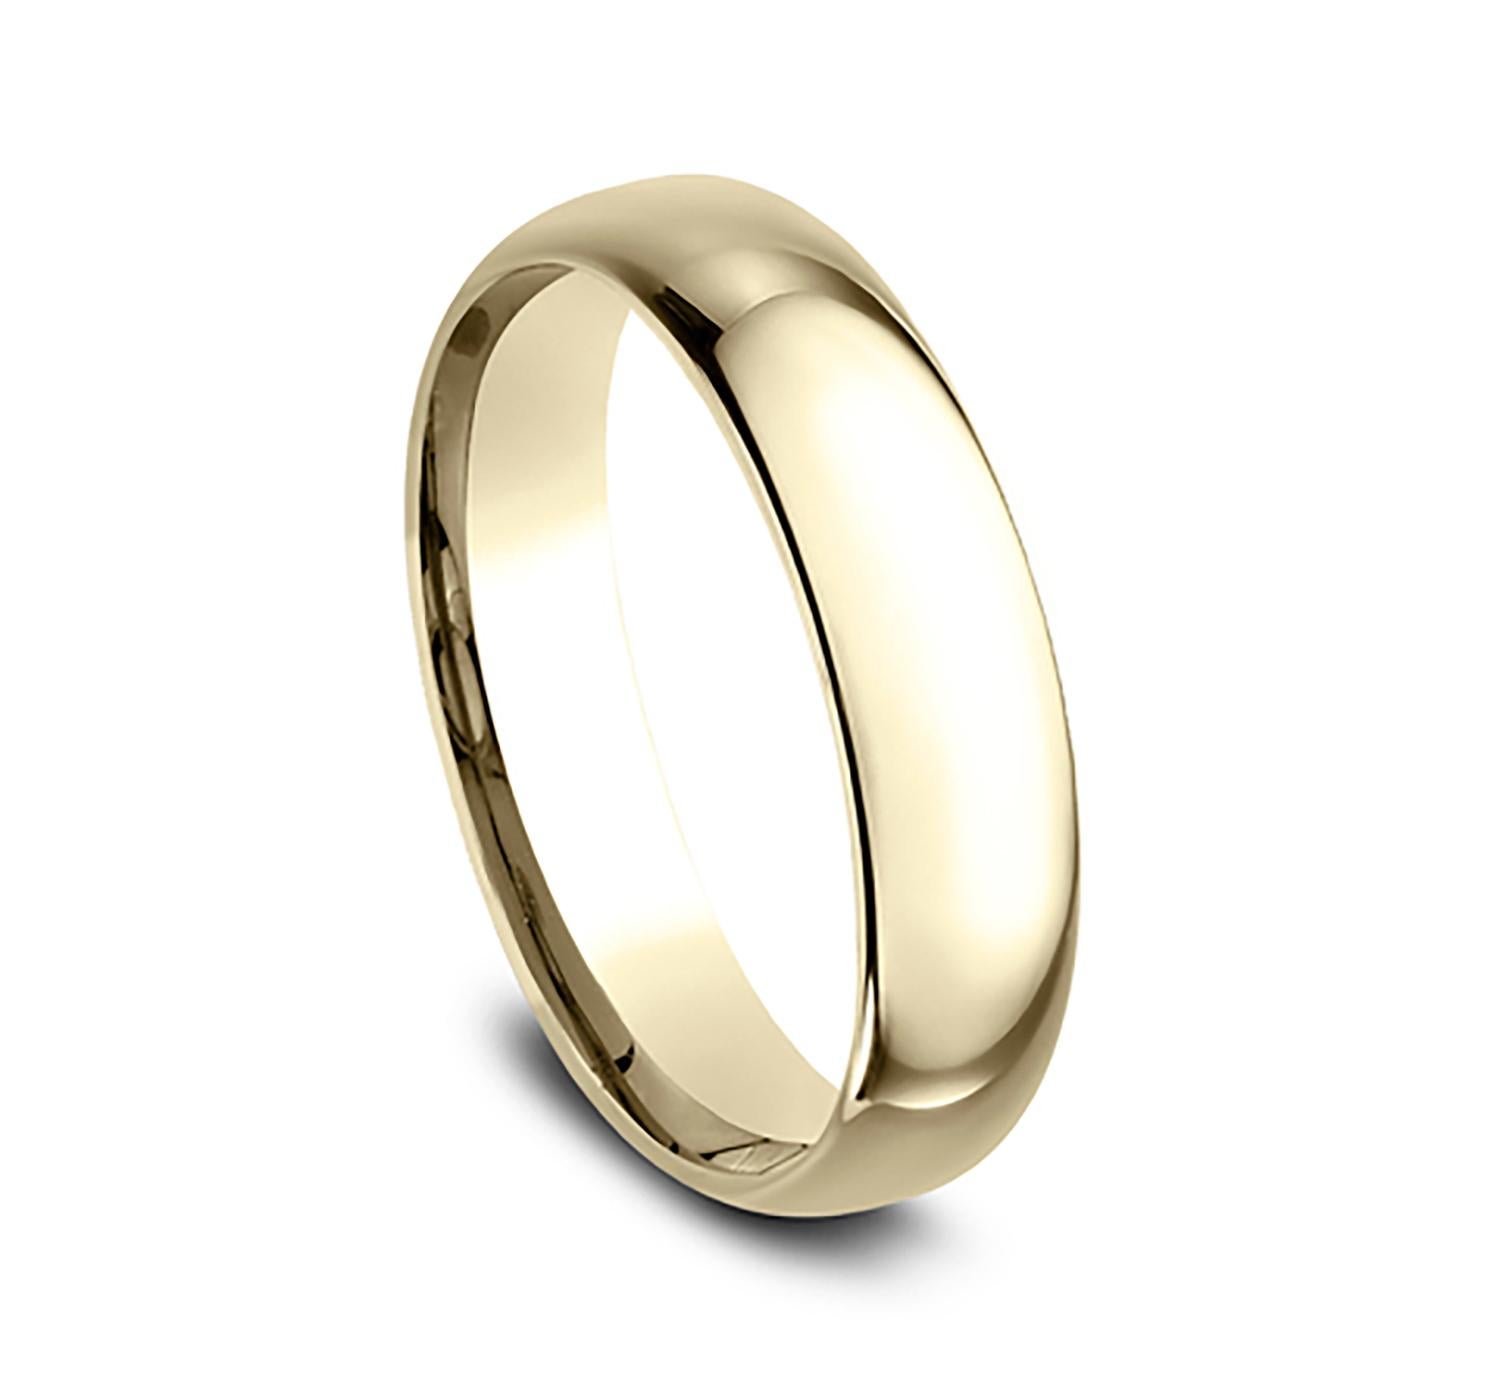 Benchmark wedding band in 14K yellow gold polished finish. Width 5mm, high dome comfort fit. Custom engraving and finishing available. Size 10 US and resizable upon request. Available in 1/4, 1/2, and 3/4 sizes, for more information please message